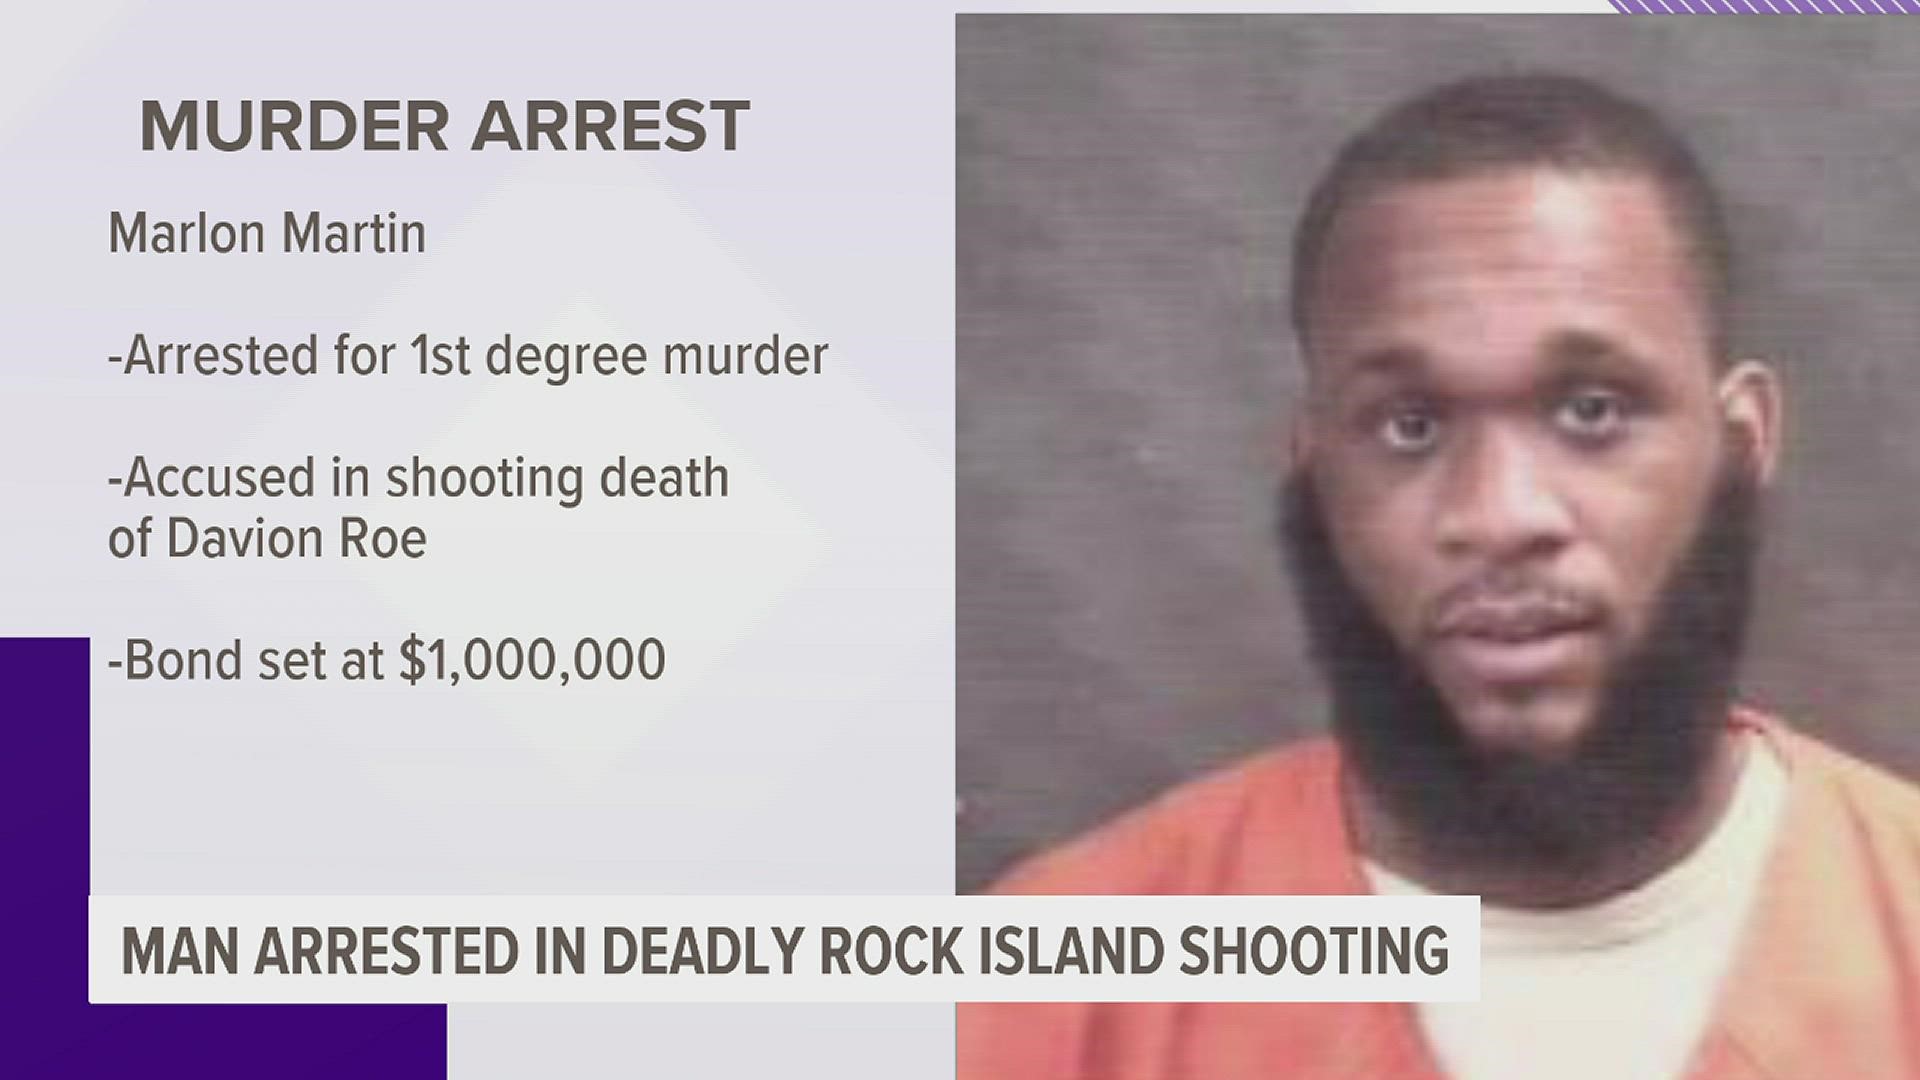 Marlon K. Martin, 23, was wanted by Rock Island police in connection to the fatal shooting of Davion Roe.